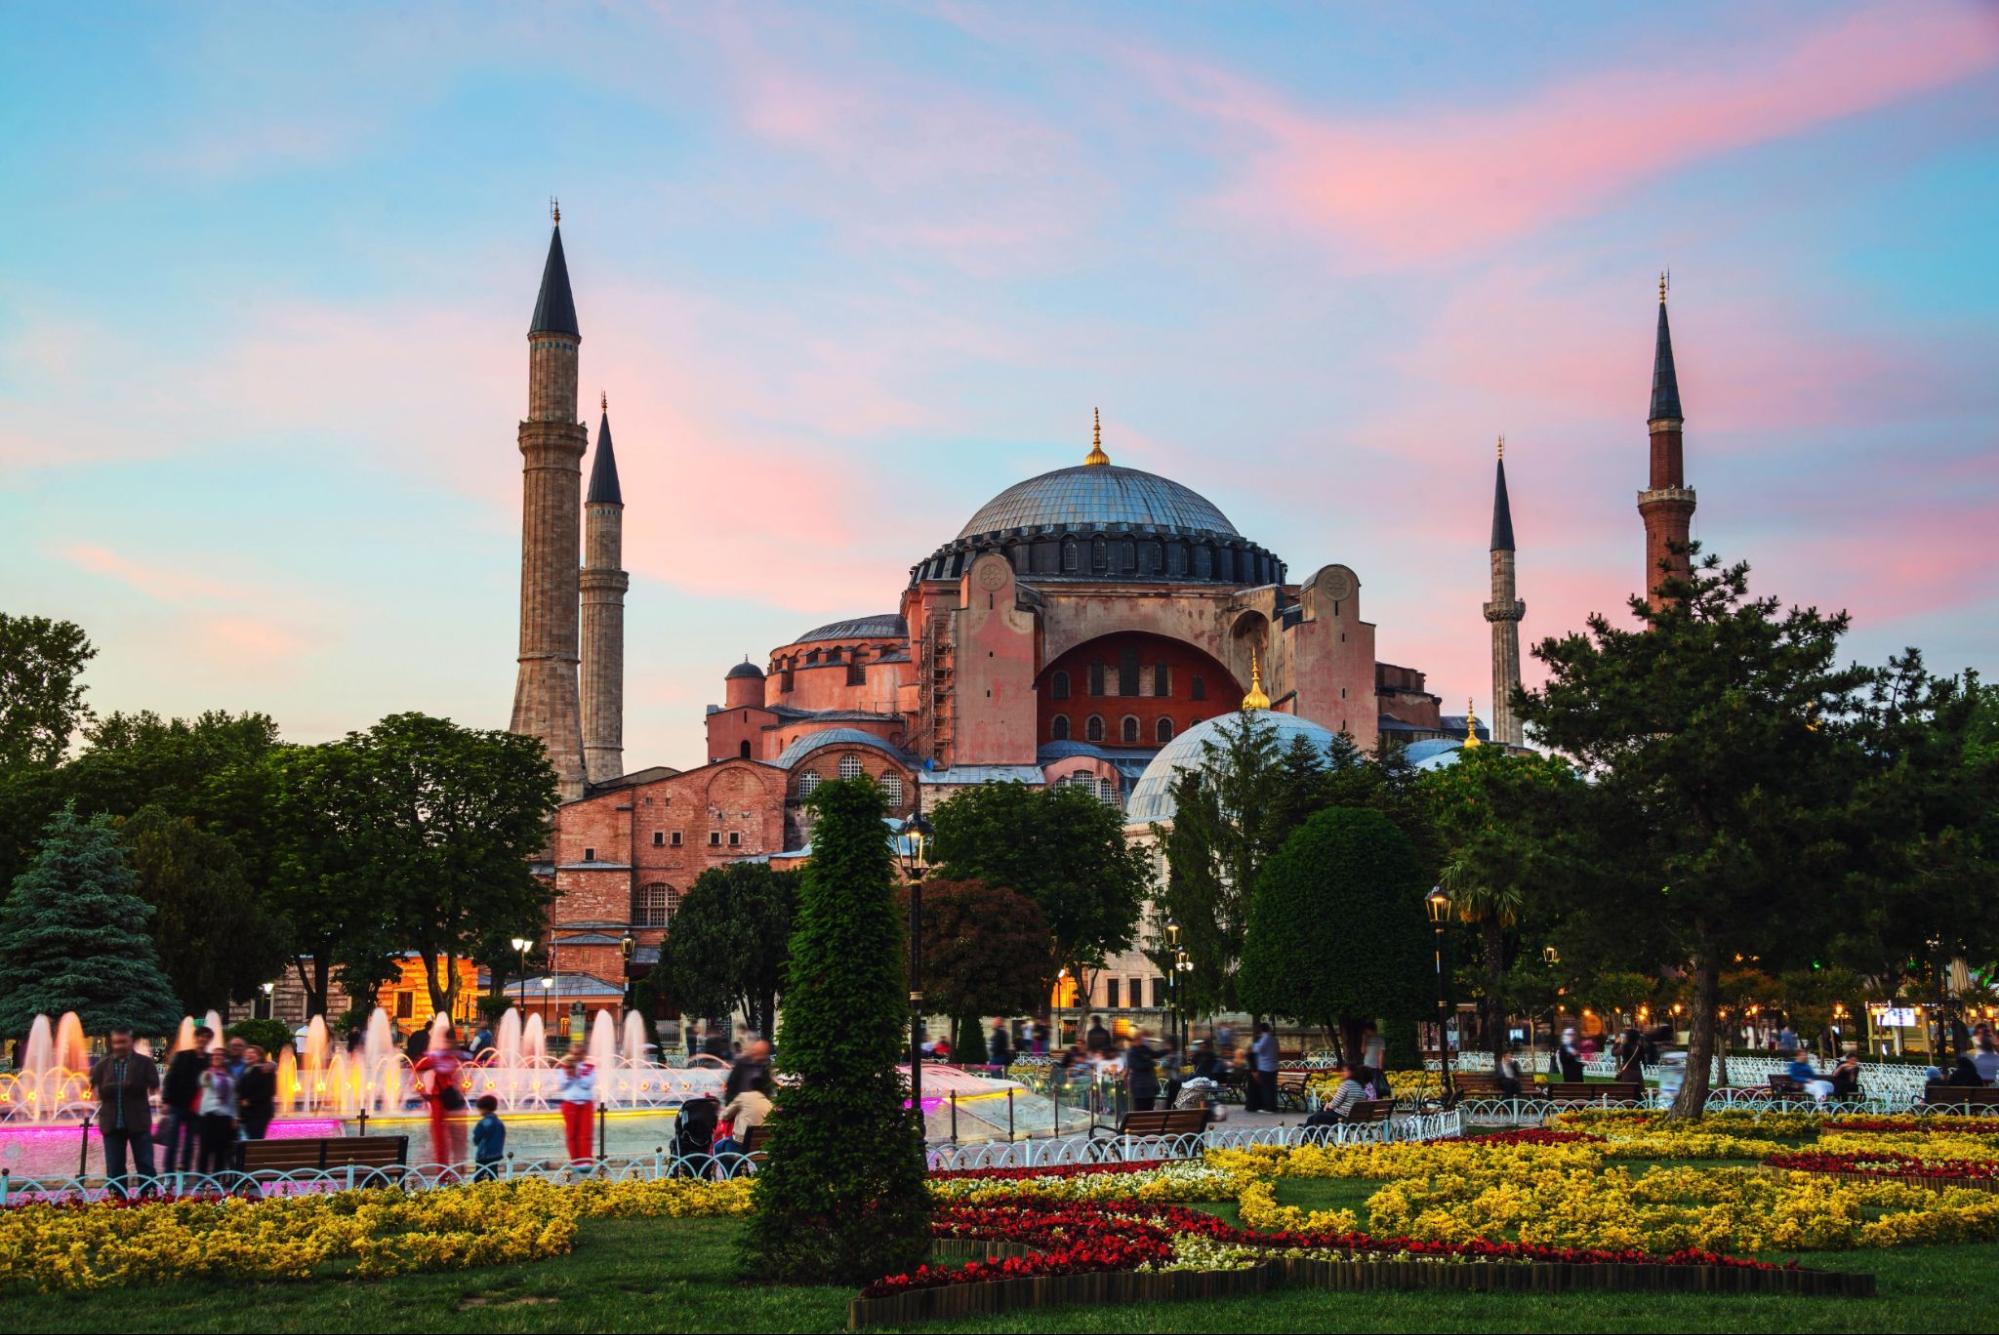 Hagia Sophia at sunset with motion blurred people walking by and illuminated fountain. Istanbul, Turkey